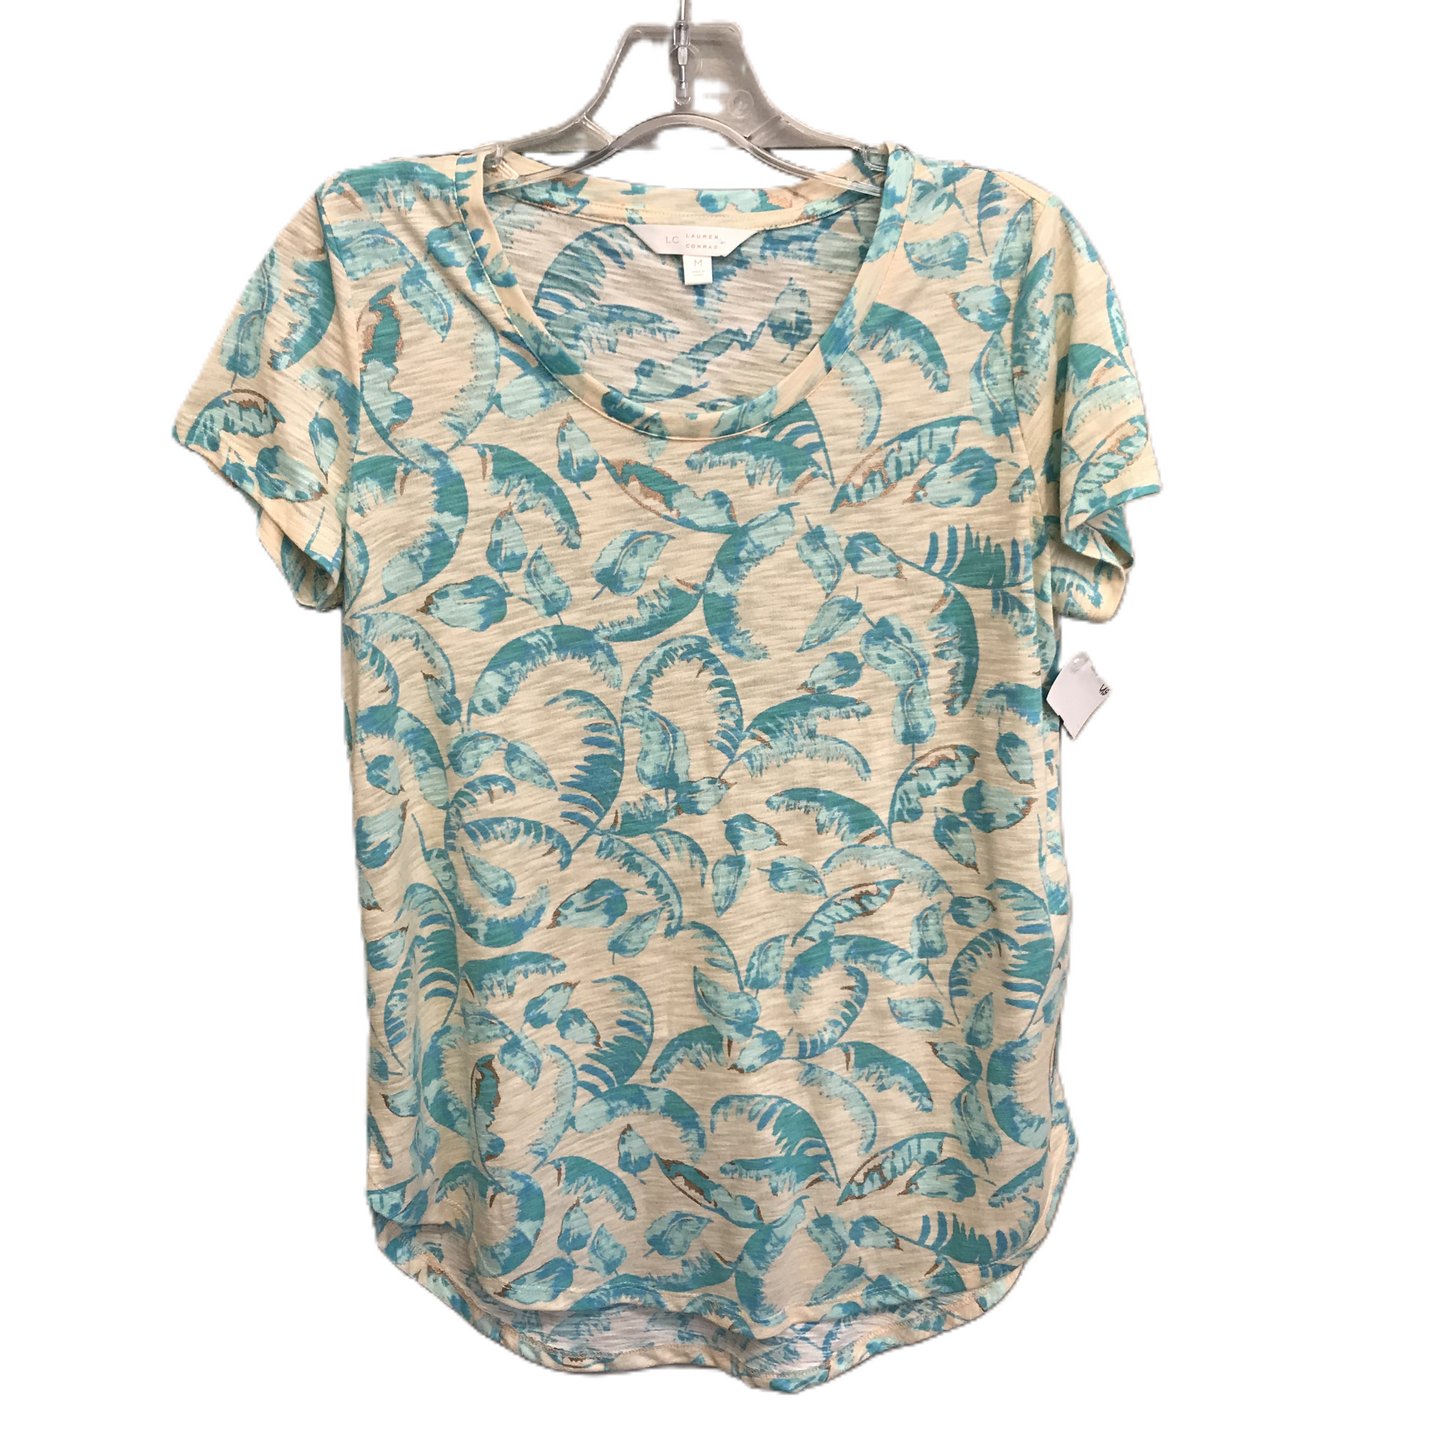 Tropical Print Top Short Sleeve By Lc Lauren Conrad, Size: M